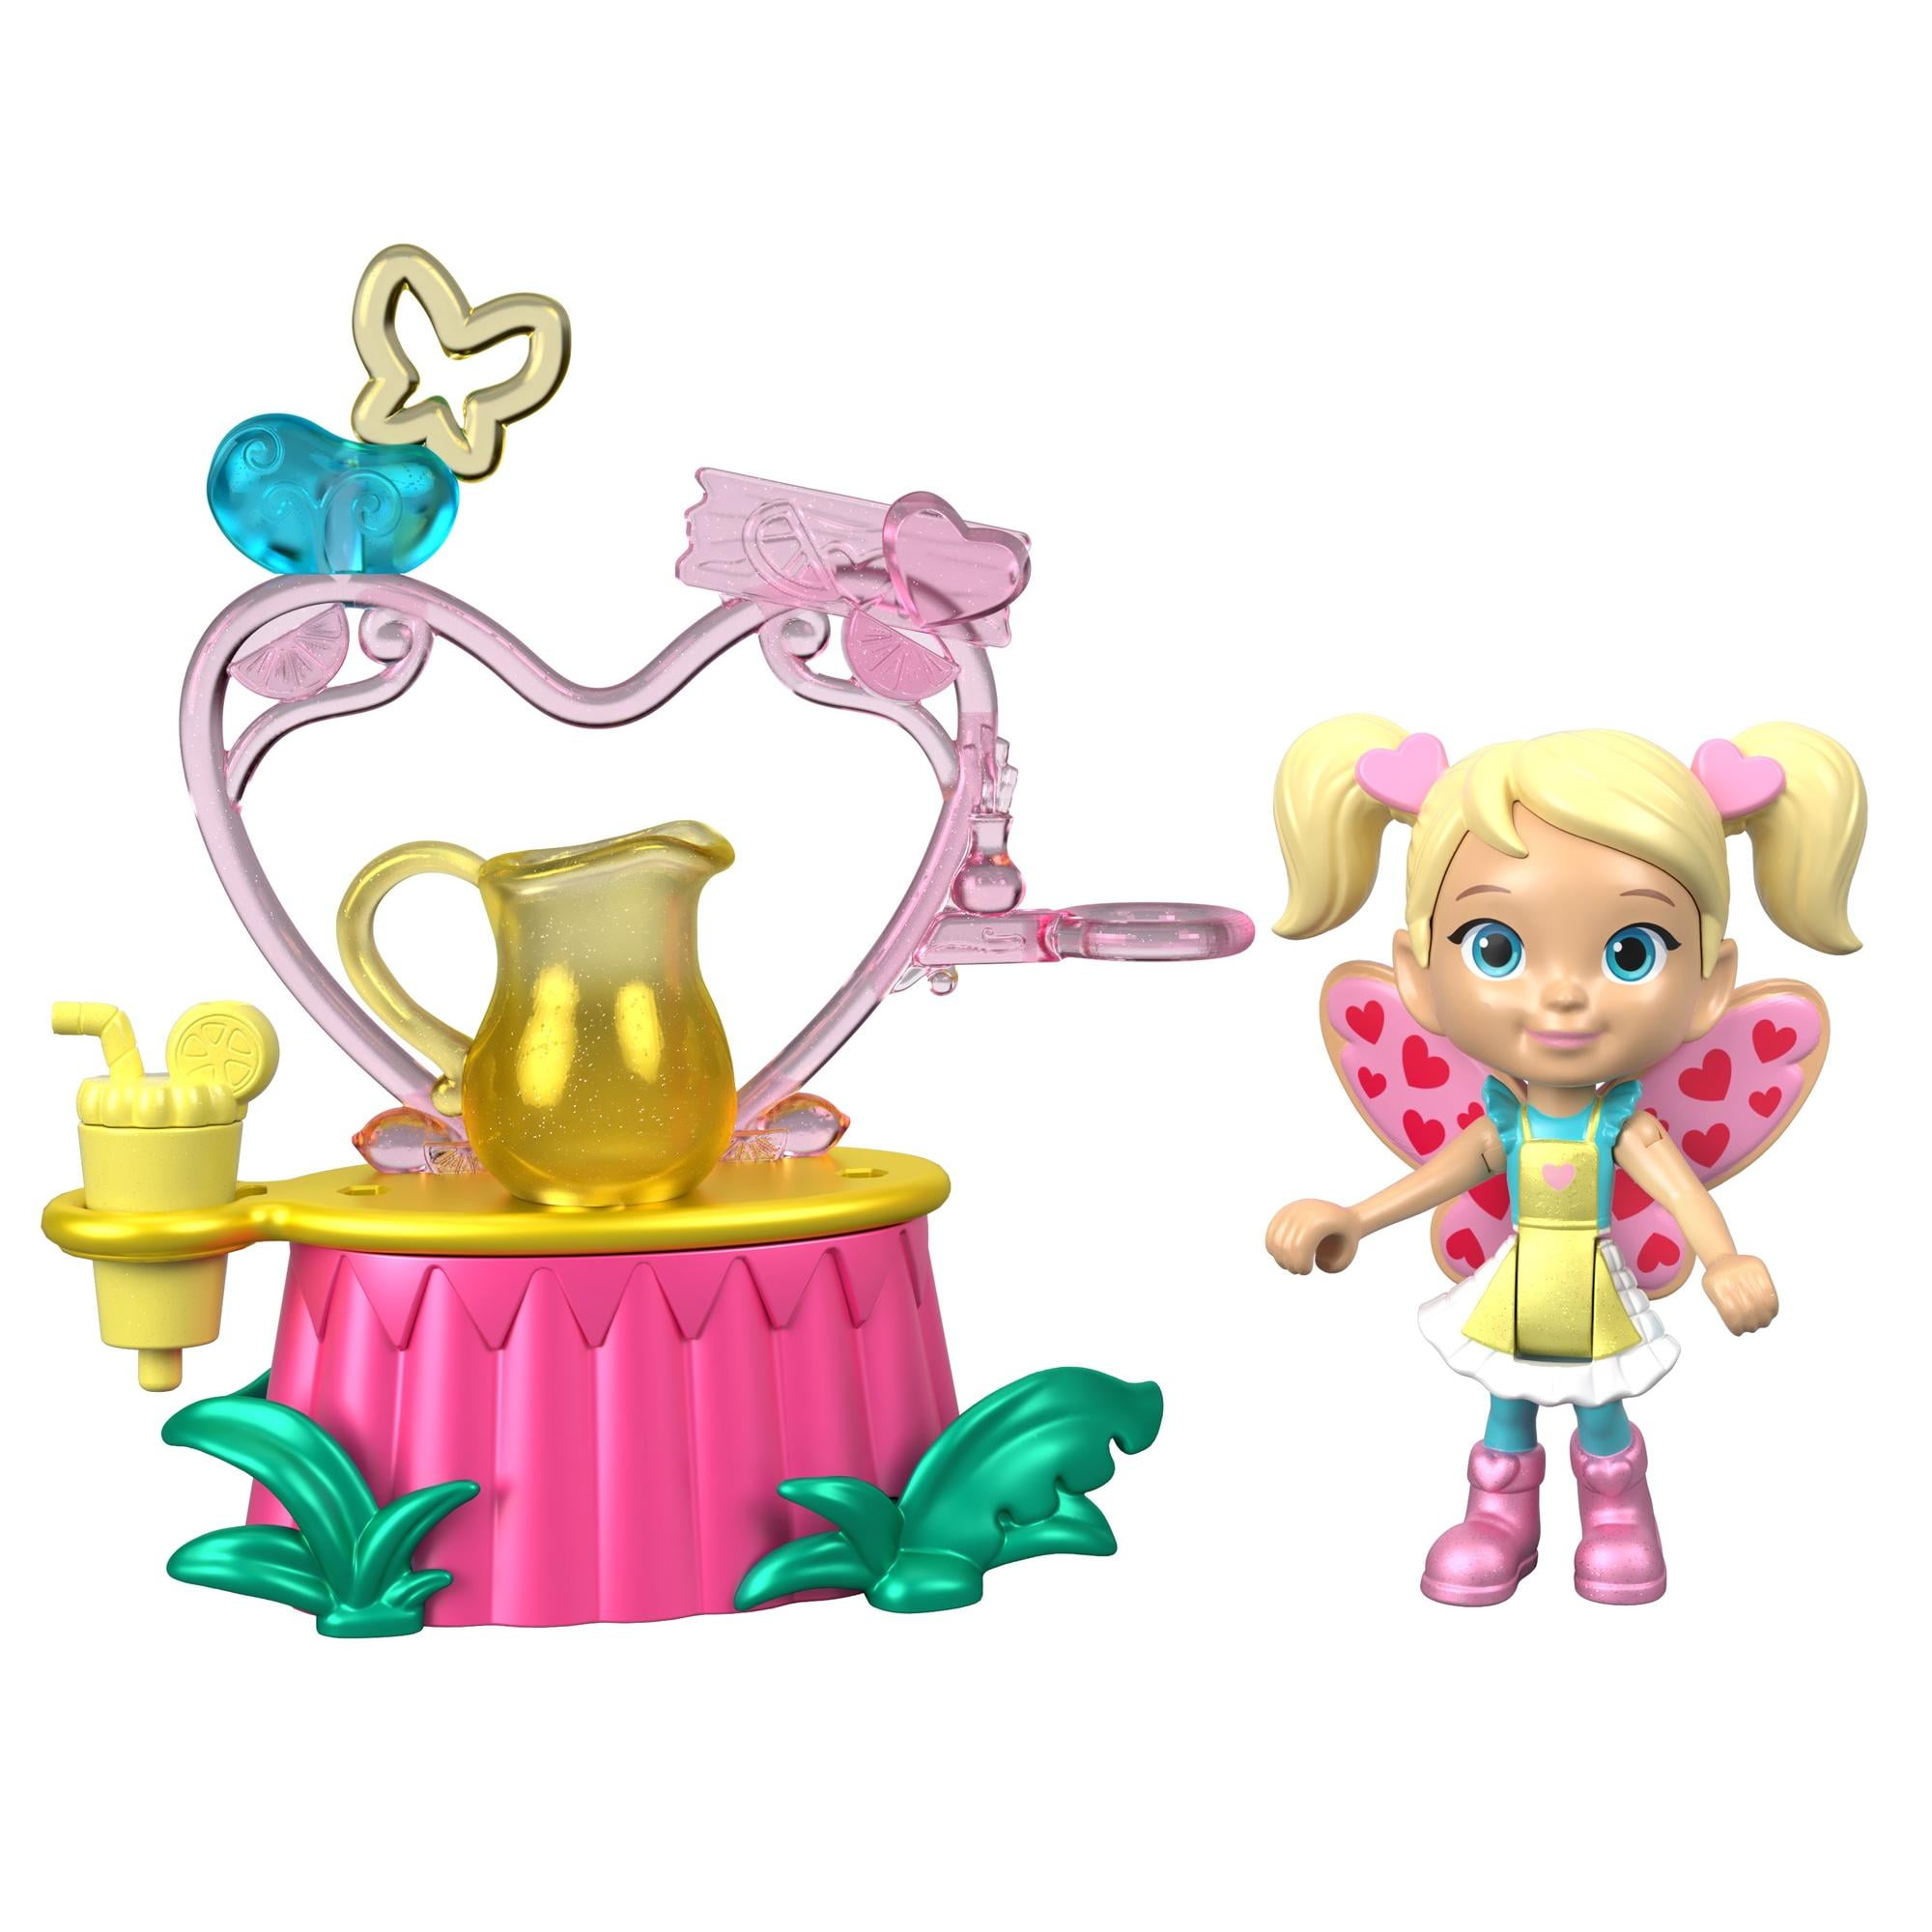 Fisher Price Nickelodeon Butterbean's Cafe Cupcake Cart Figure with Accessories 